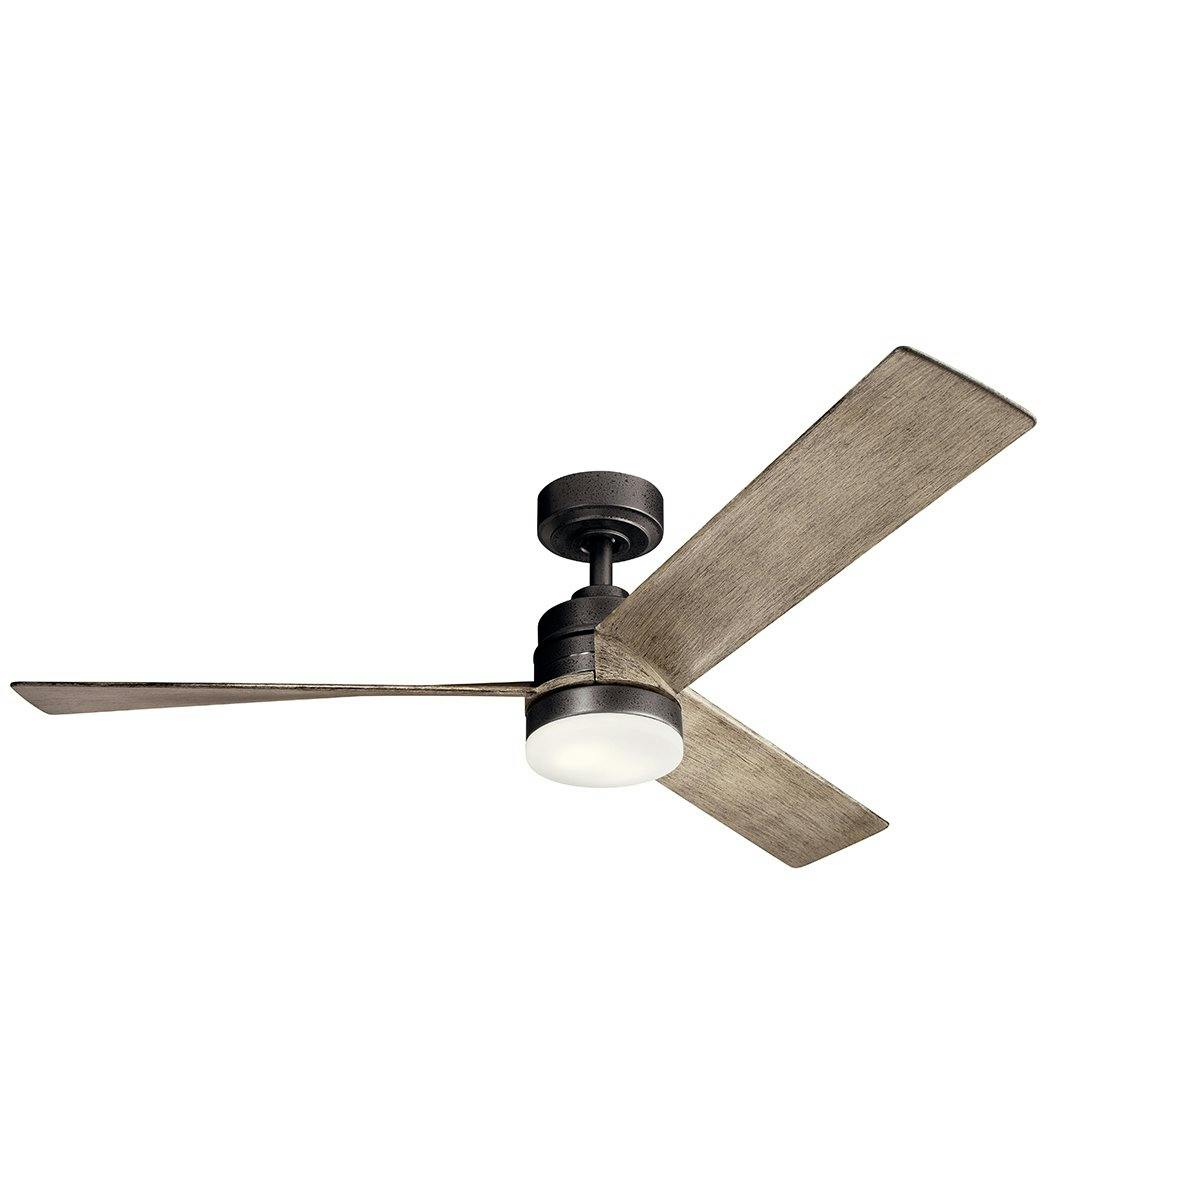 Spyn LED 52" Ceiling Fan Anvil Iron on a white background